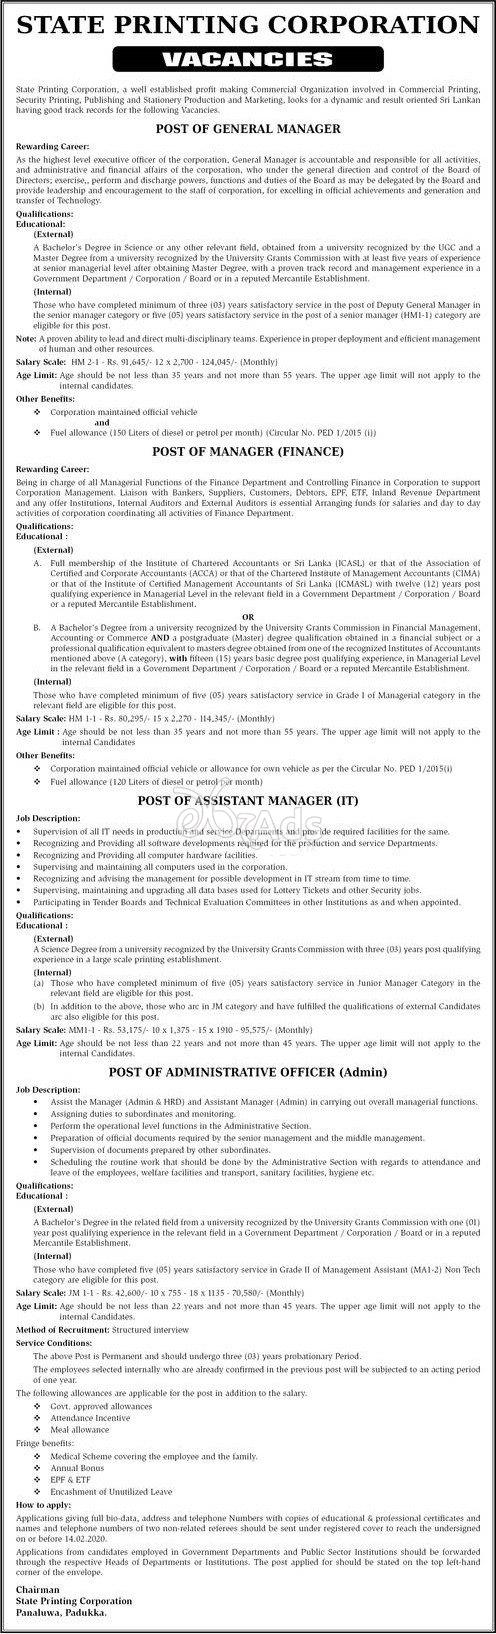 General Manager, Manager, Assistant Manager, Administration officer - State Printing Corporation Jobs 2020